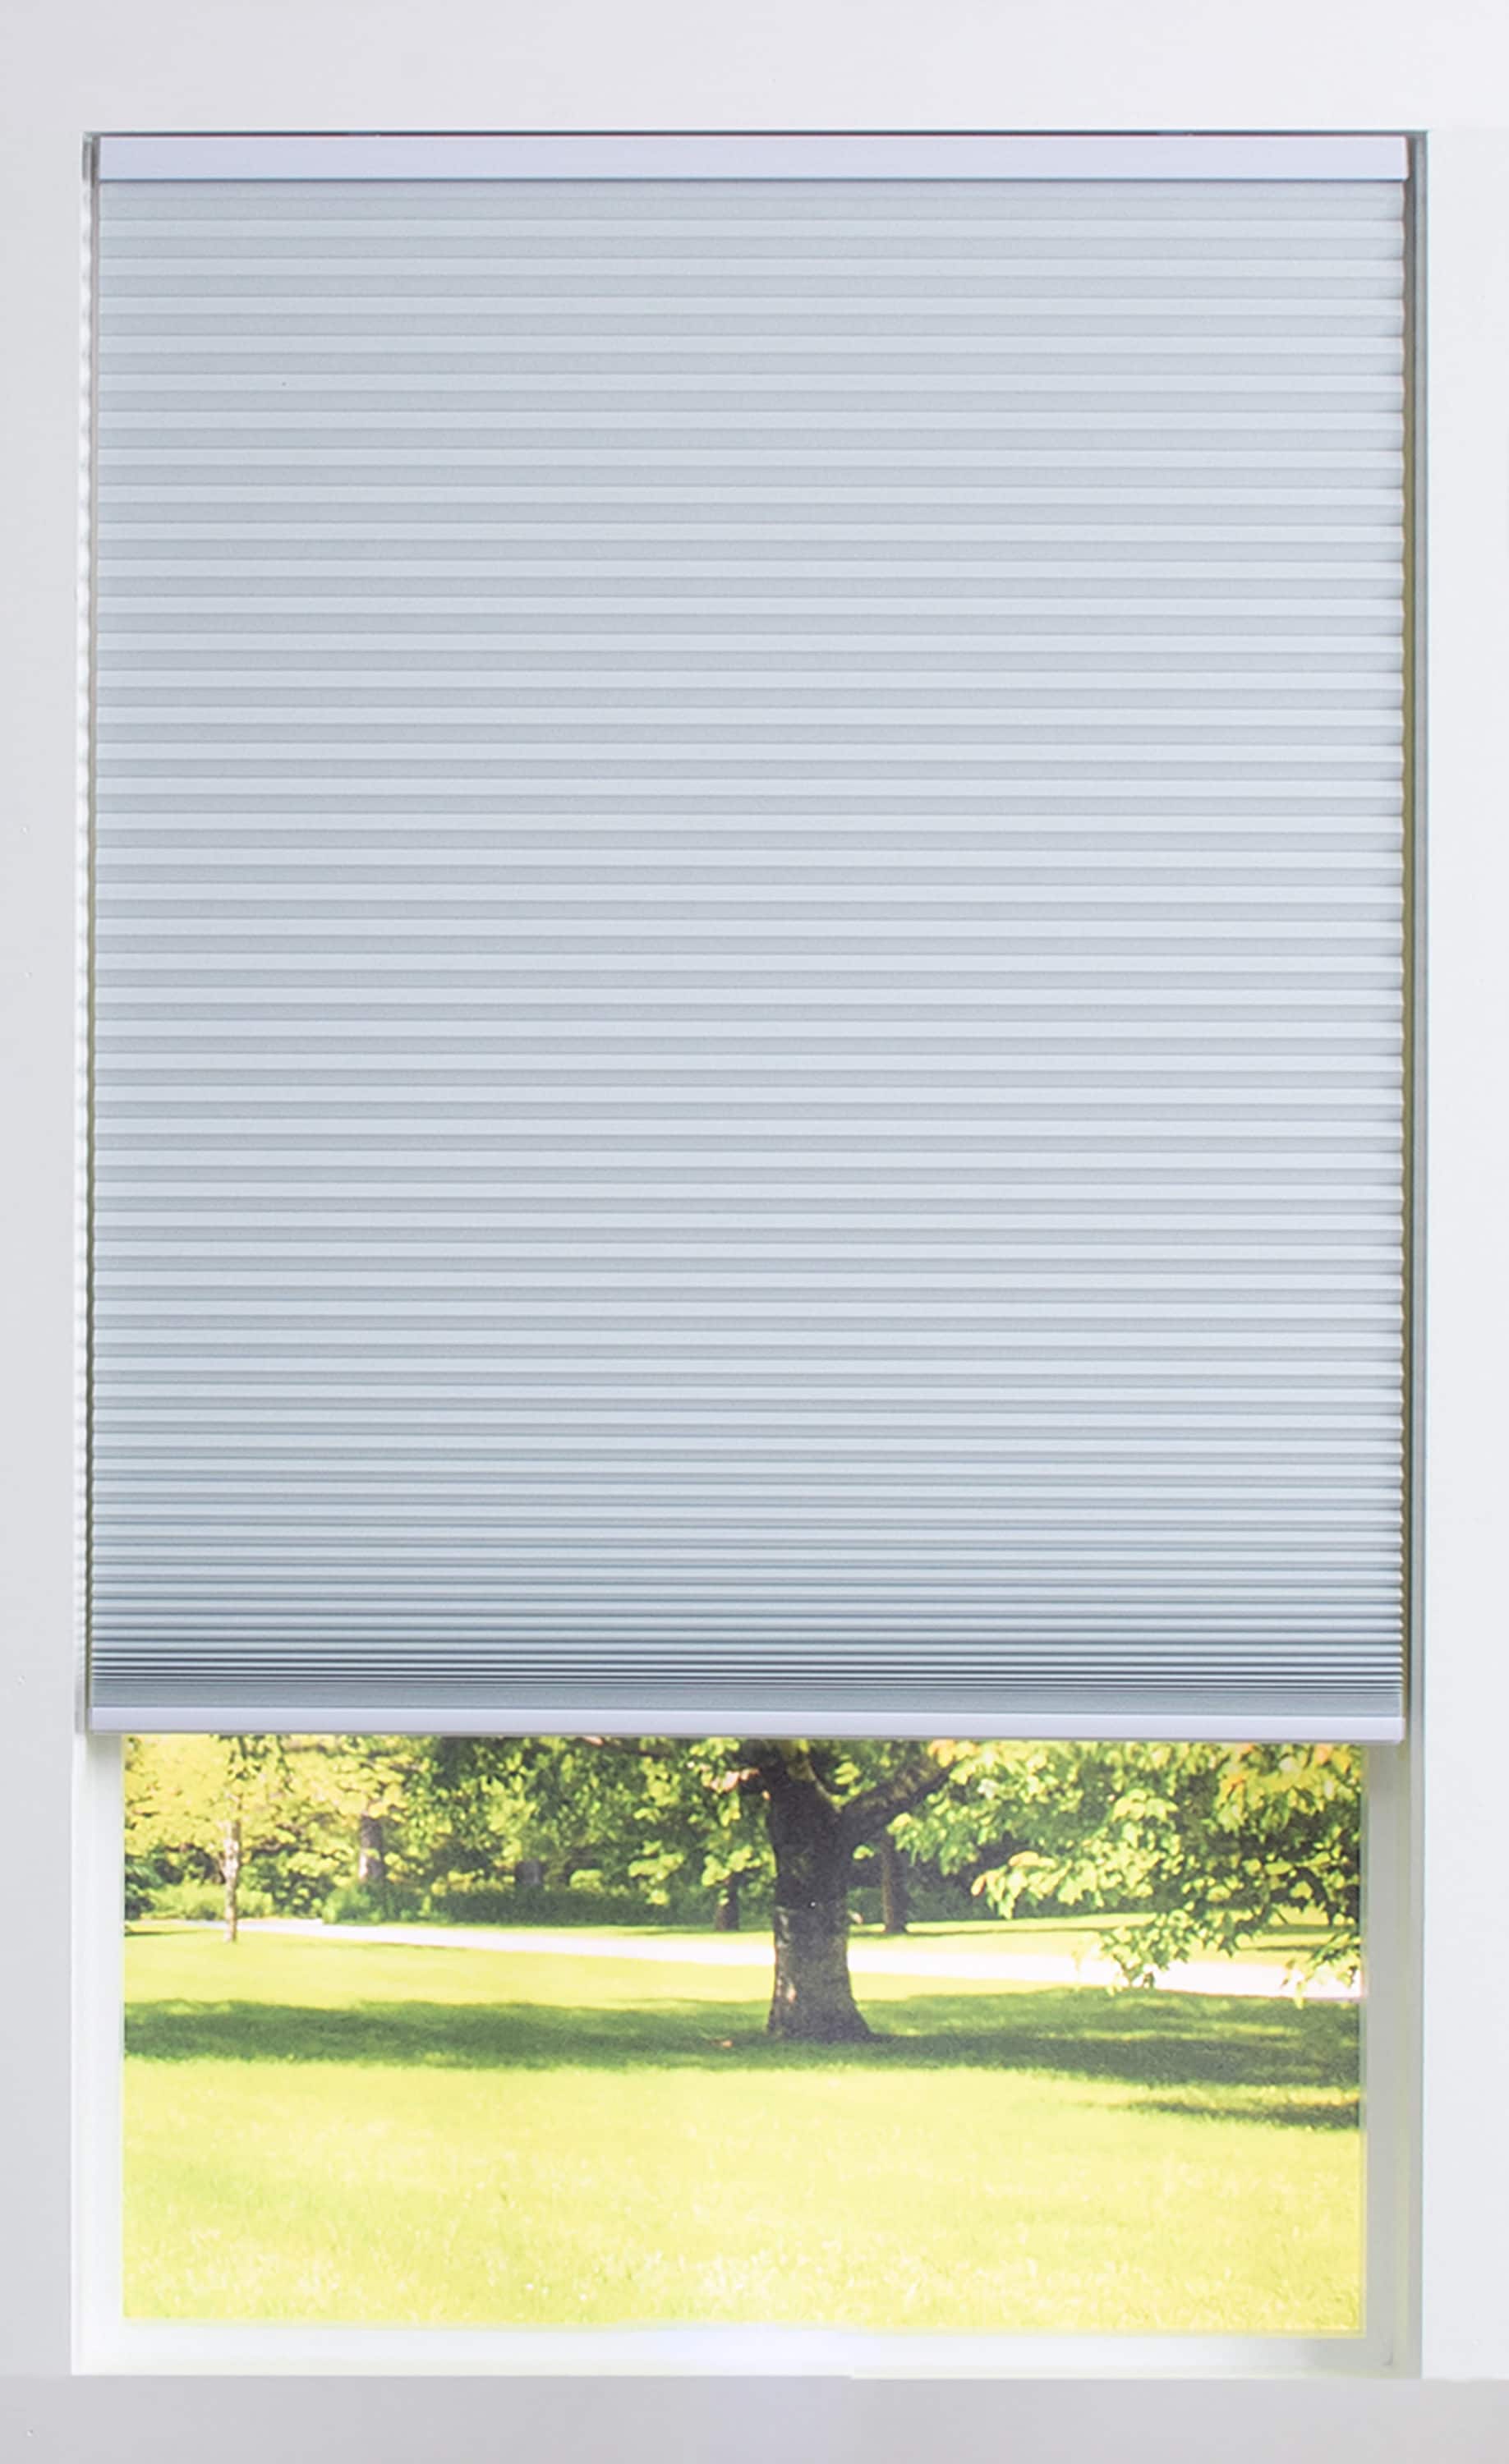 Persilux Solar Roller Shades Light Filtering Window Blinds (28 W x 72 H,  Grey) Flame Retardant, UV Protection Sheer Blinds for Windows Shades for Windows  Indoor, Home, Easy to Install 